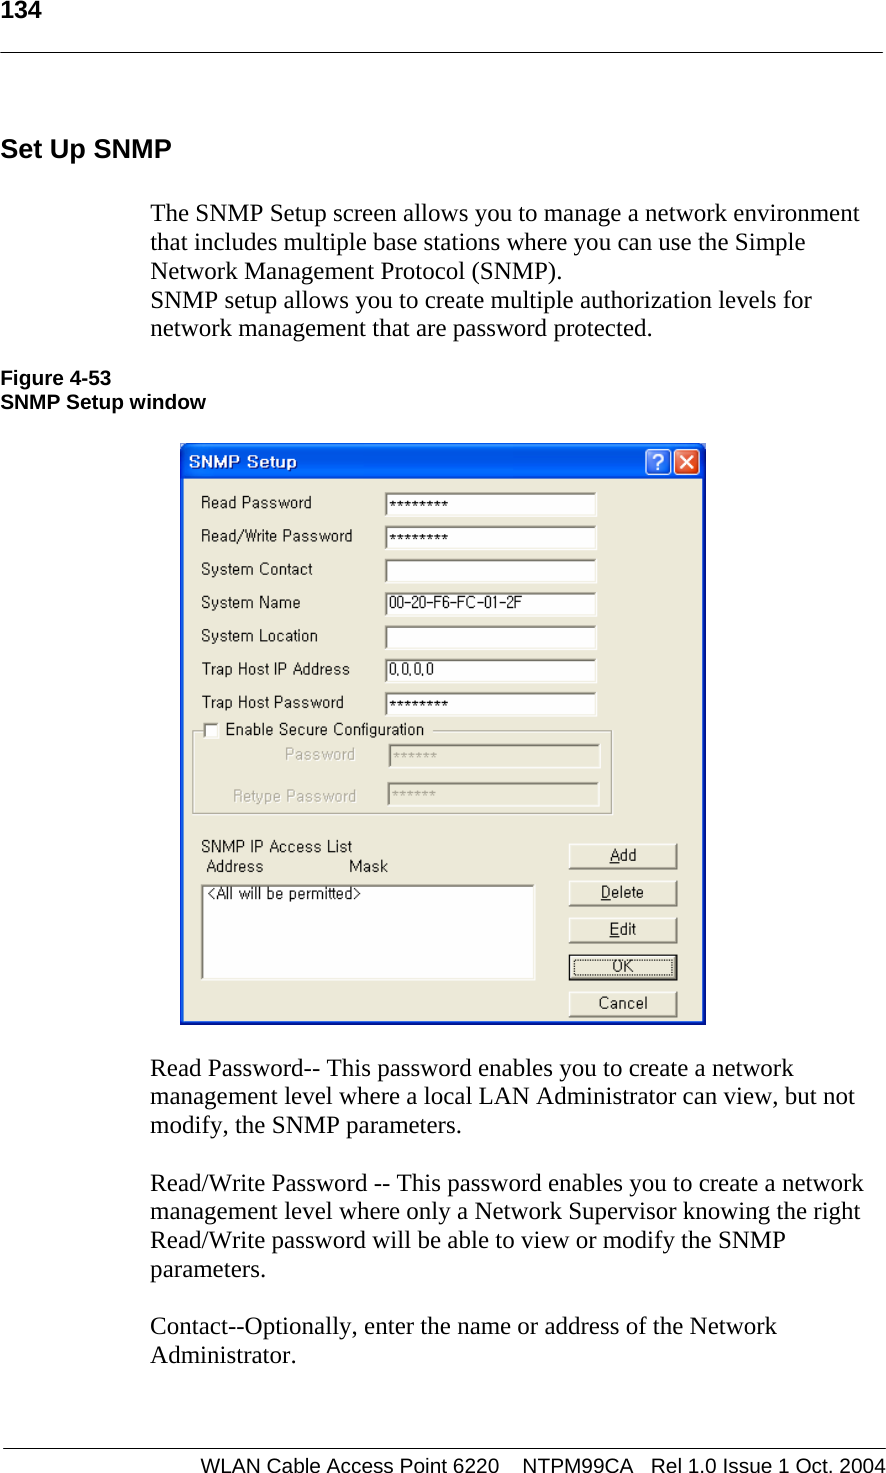   134   Set Up SNMP  The SNMP Setup screen allows you to manage a network environment that includes multiple base stations where you can use the Simple Network Management Protocol (SNMP).  SNMP setup allows you to create multiple authorization levels for network management that are password protected.  Figure 4-53 SNMP Setup window    Read Password-- This password enables you to create a network management level where a local LAN Administrator can view, but not modify, the SNMP parameters.  Read/Write Password -- This password enables you to create a network management level where only a Network Supervisor knowing the right Read/Write password will be able to view or modify the SNMP parameters.  Contact--Optionally, enter the name or address of the Network Administrator.   WLAN Cable Access Point 6220    NTPM99CA   Rel 1.0 Issue 1 Oct. 2004